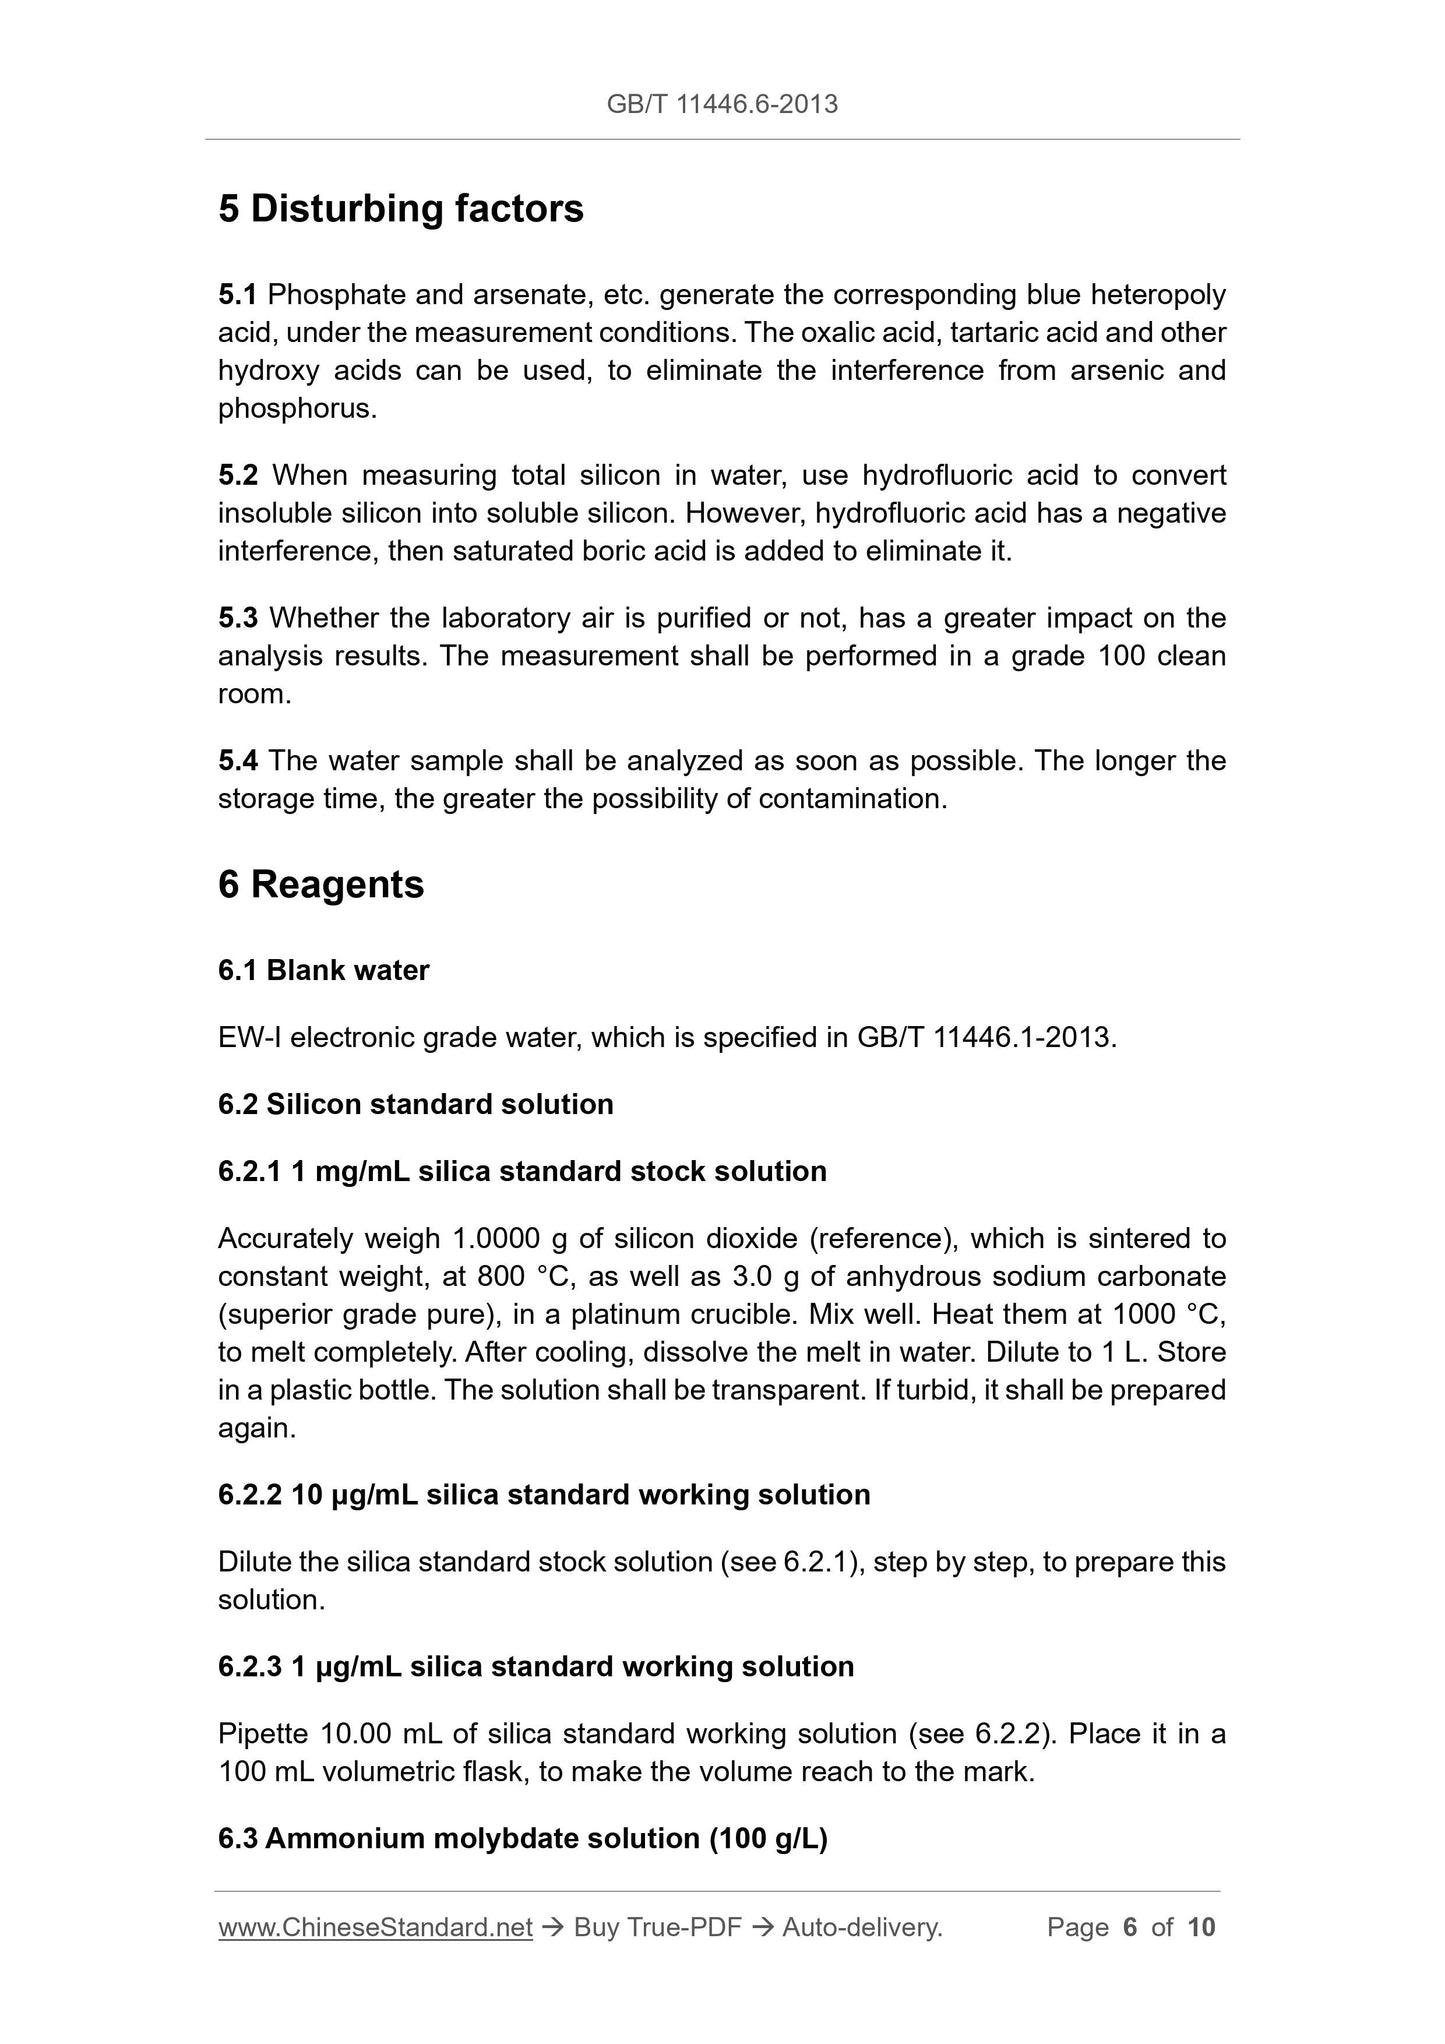 GB/T 11446.6-2013 Page 4